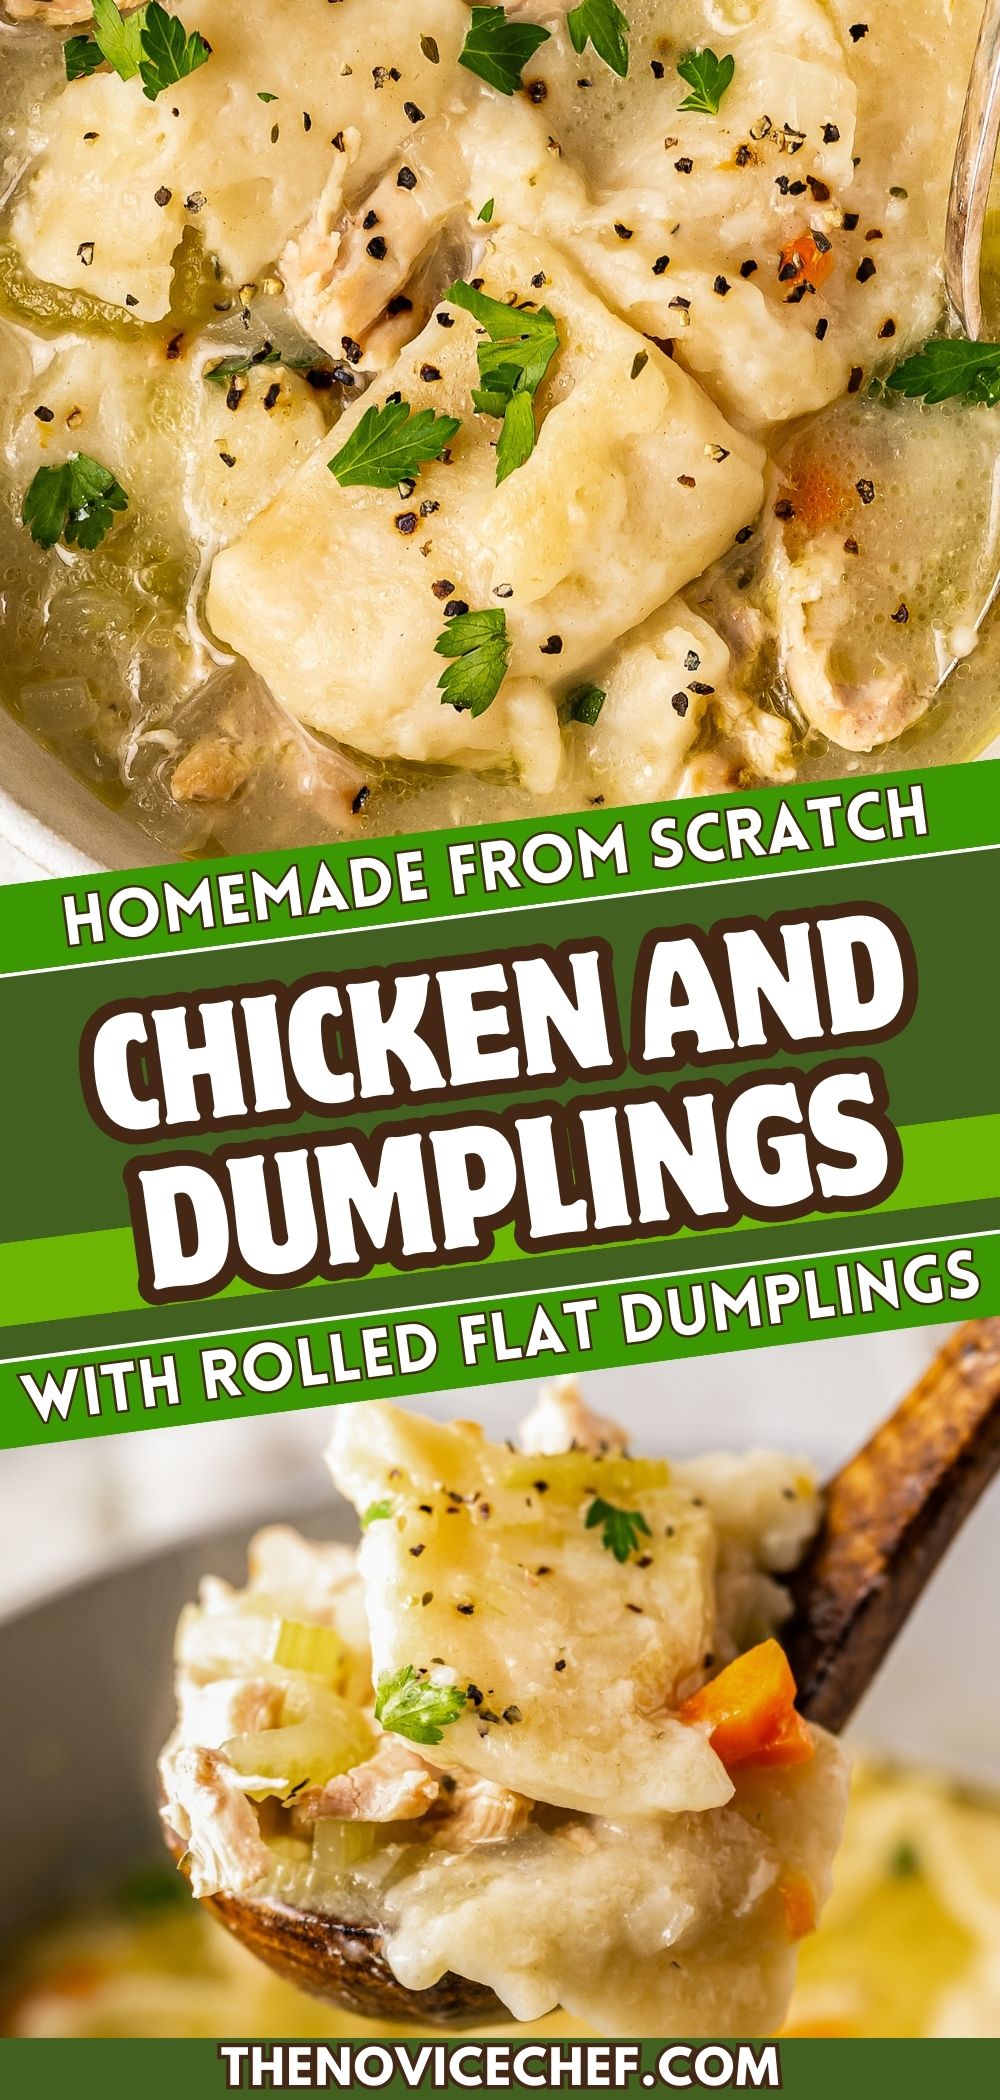 Southern Chicken and Dumplings Recipe | The Novice Chef